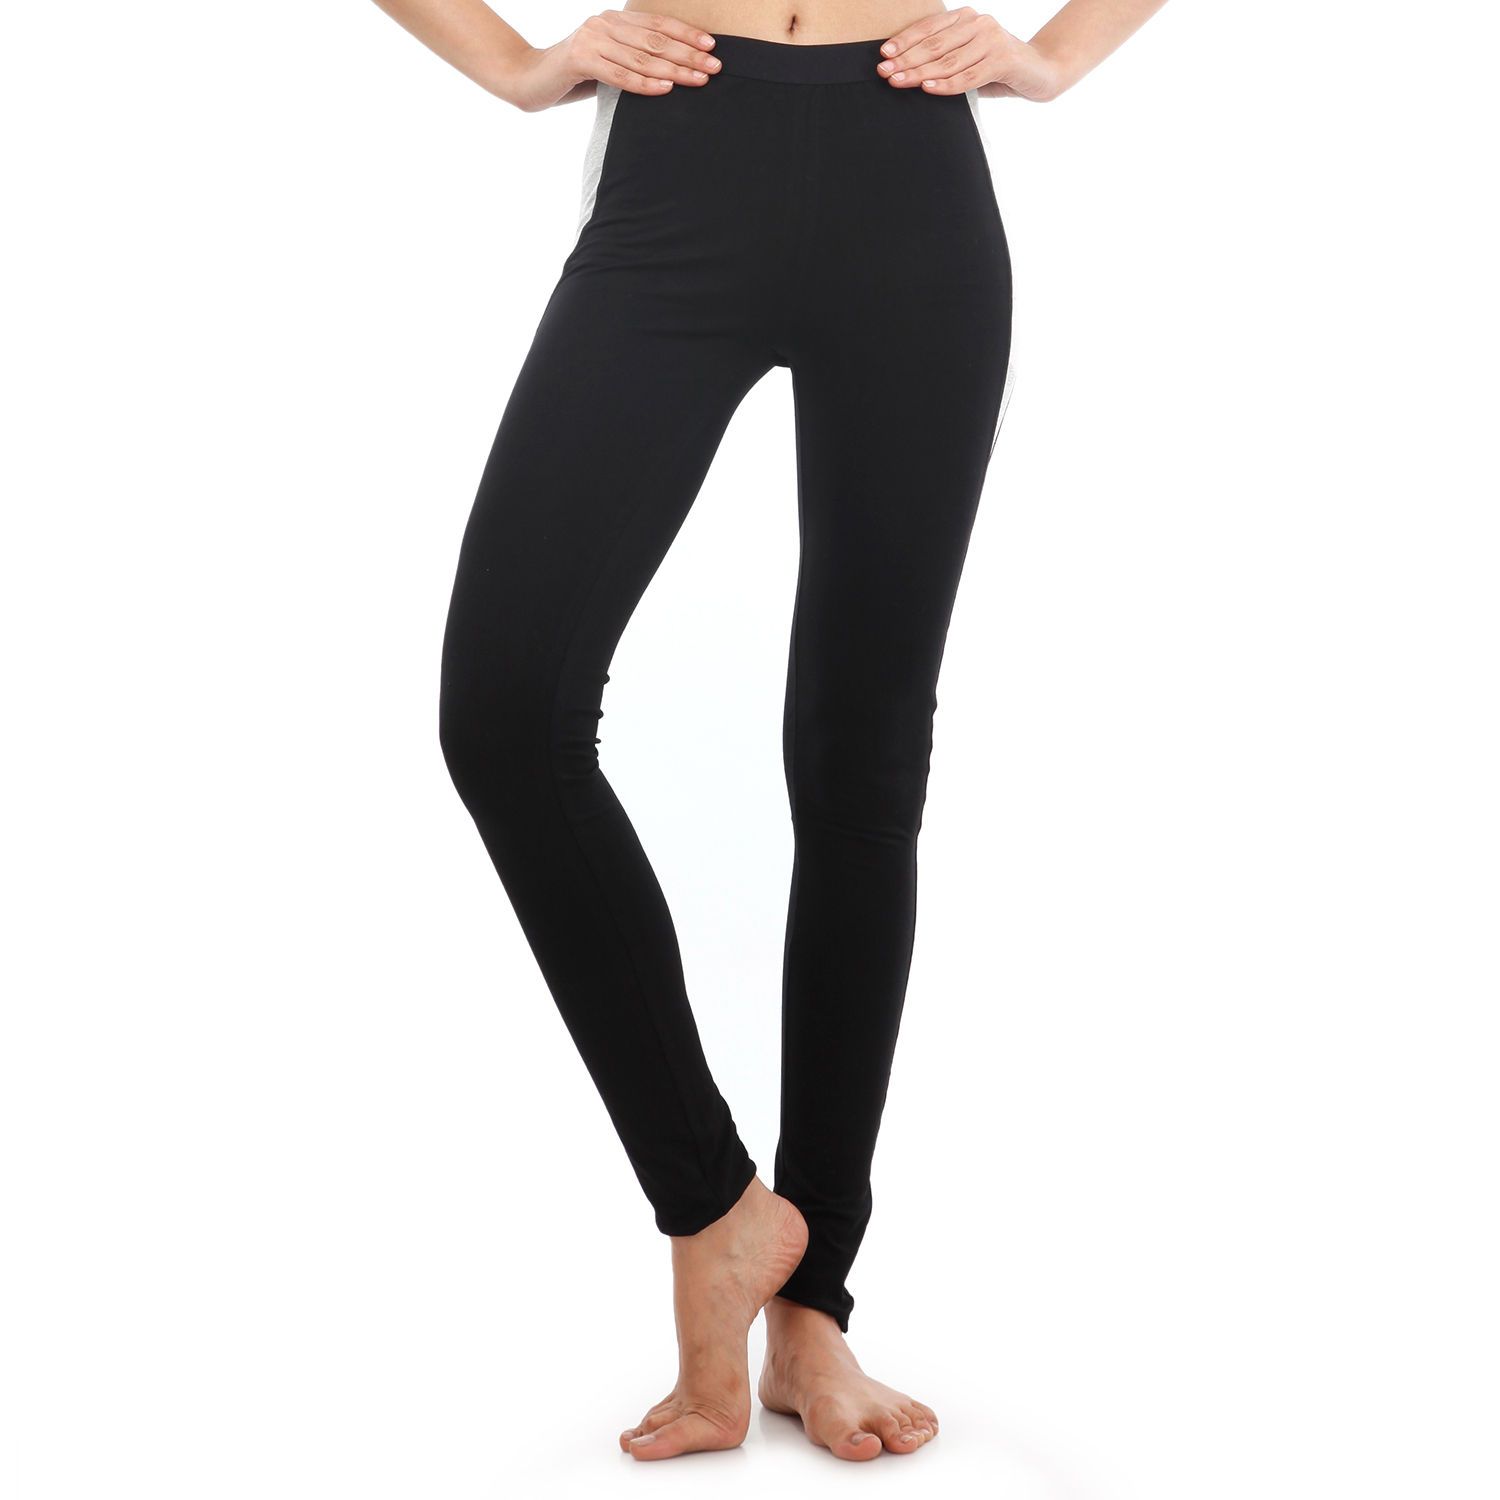 Which is the best site to buy workout clothing and accessories for women in  India  Quora